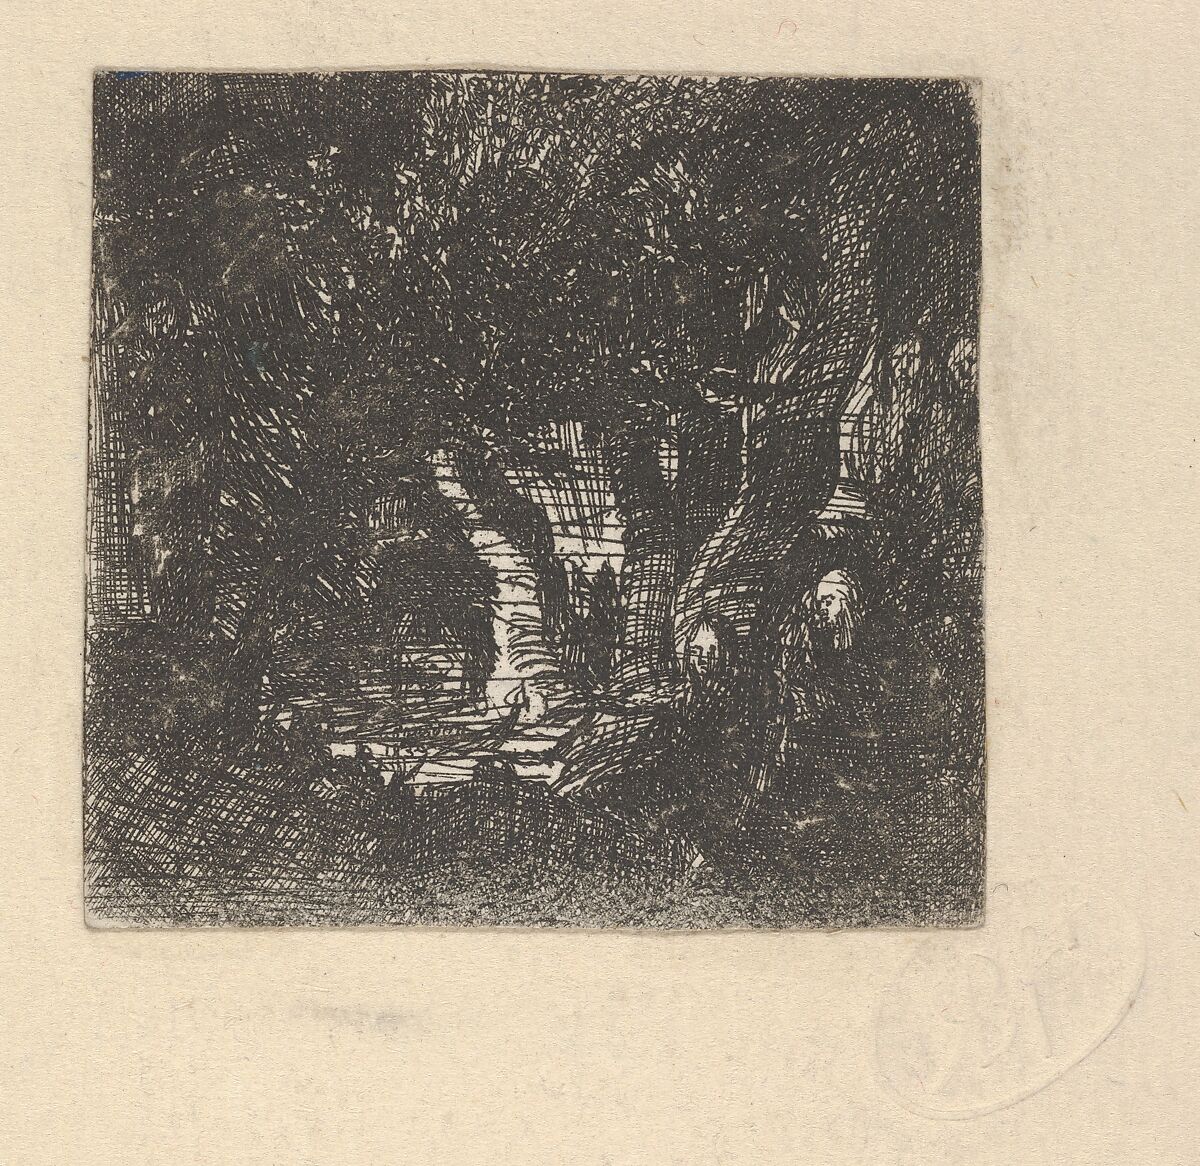 La Sainte Famille et Les Bergers (The Holy Family and the Shepherds), Rodolphe Bresdin (French, Montrelais 1822–1885 Sèvres), Etching 